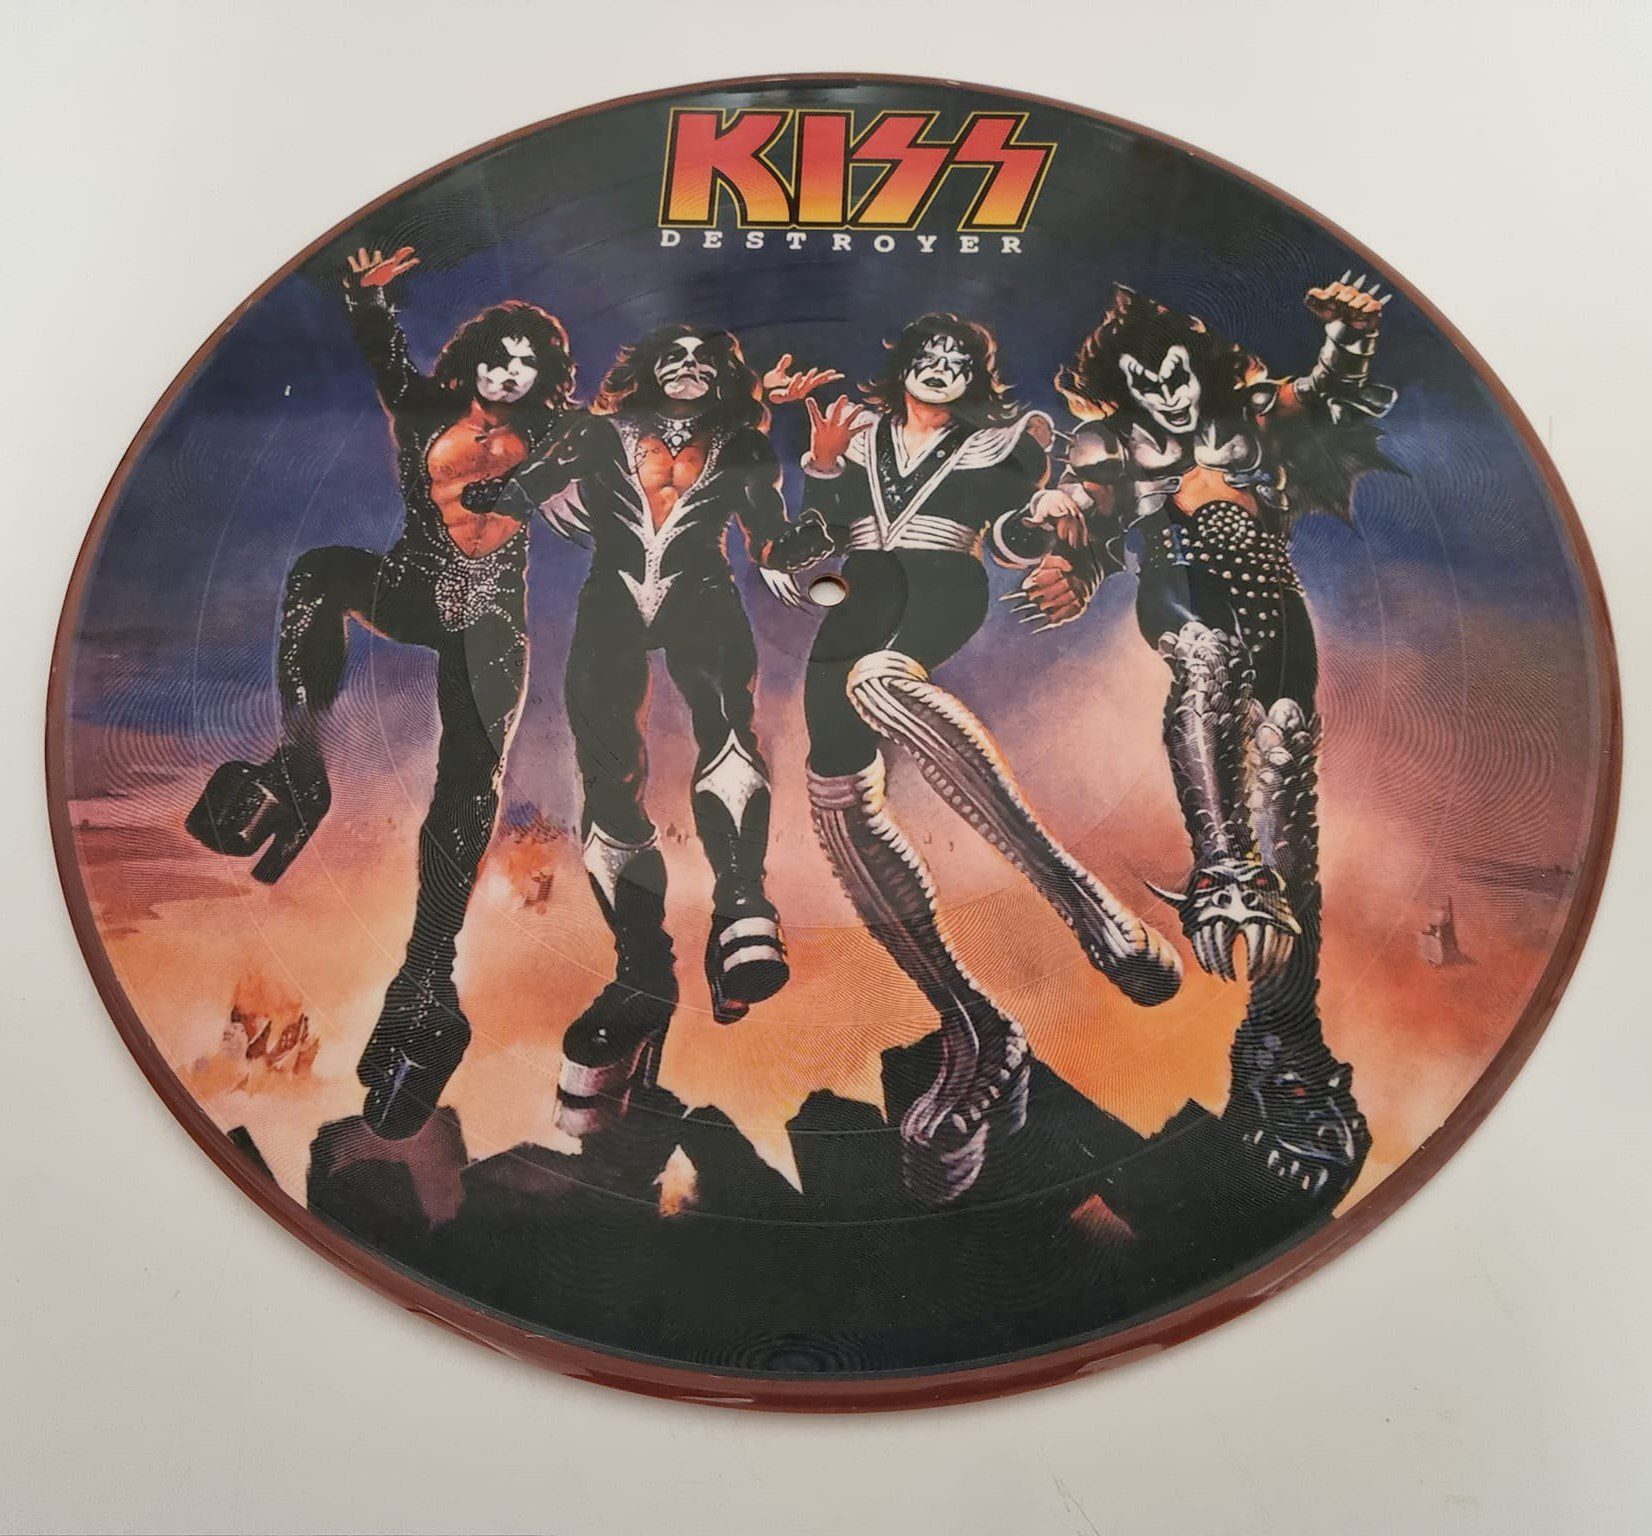 Buy this Rare Kiss record by clicking here